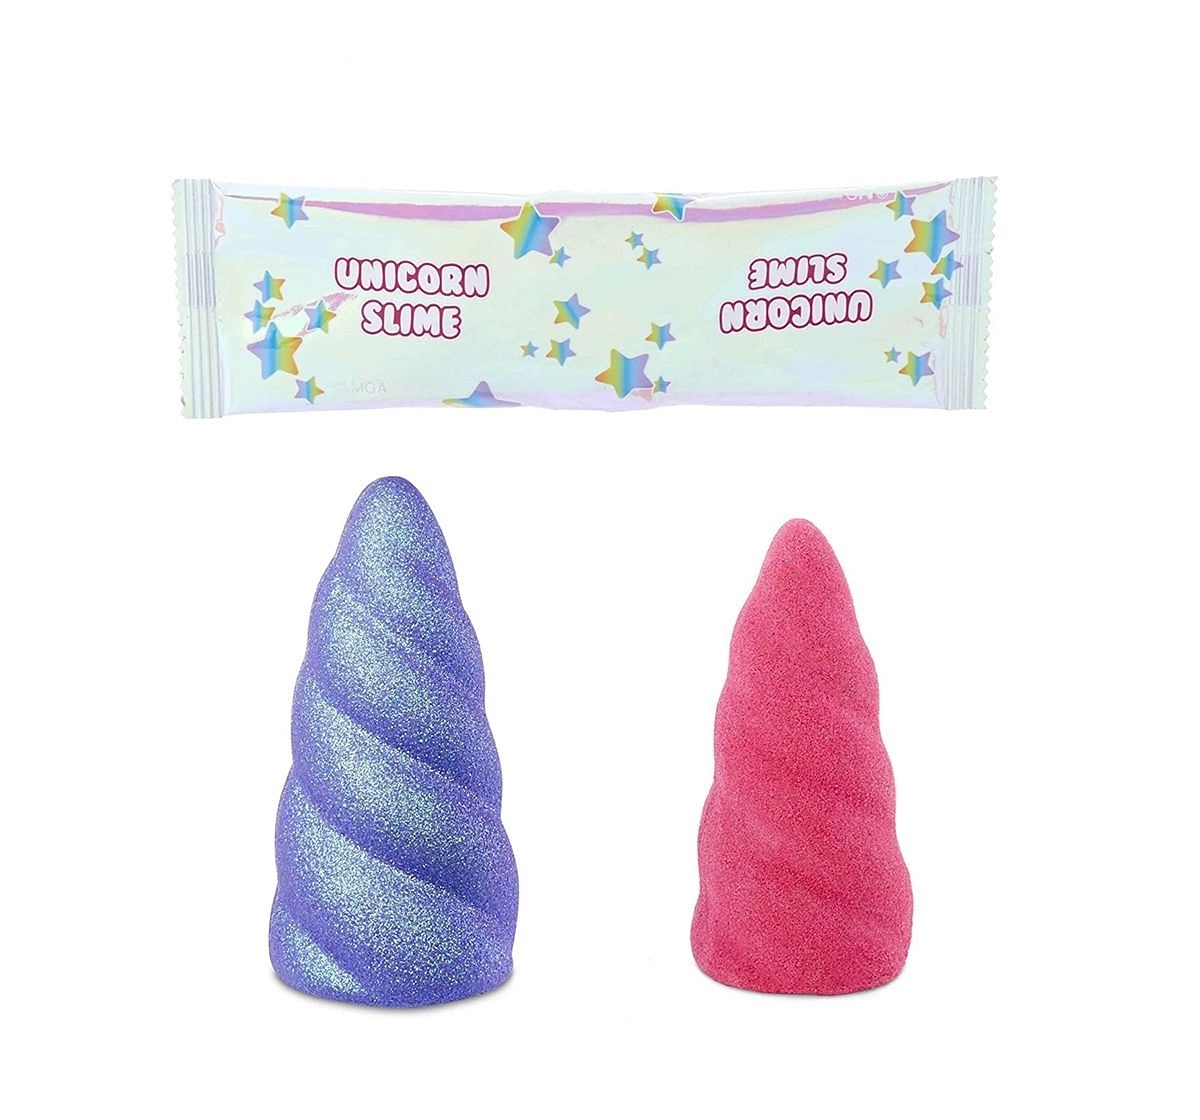 Poopsie Unicorn Crush With Glitter & Slime Sand, Slime & Others for Kids age 5Y+ 